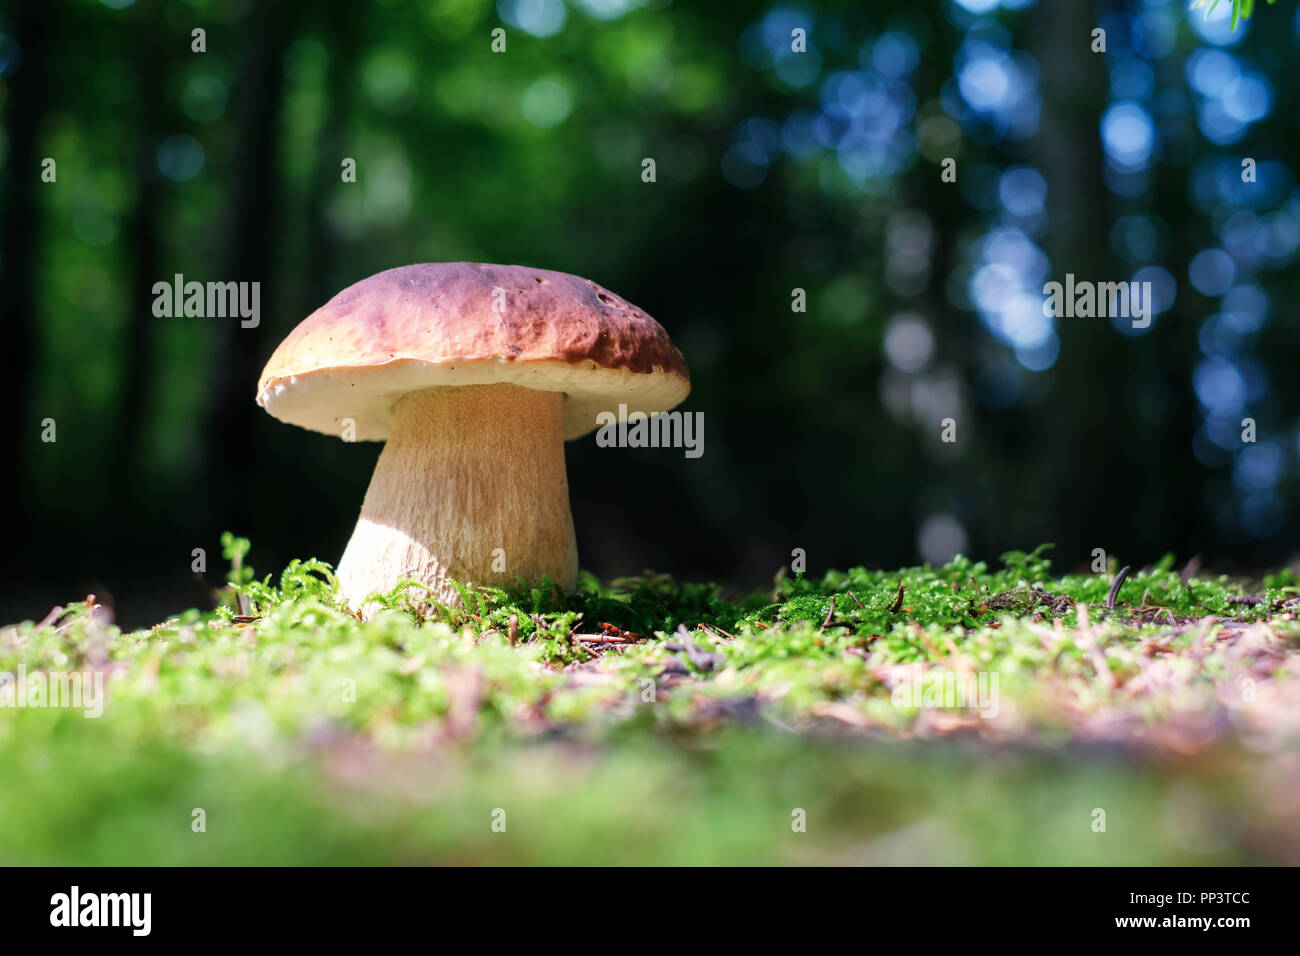 Big white mushroom in summer forest. Nature landscape photography Stock Photo